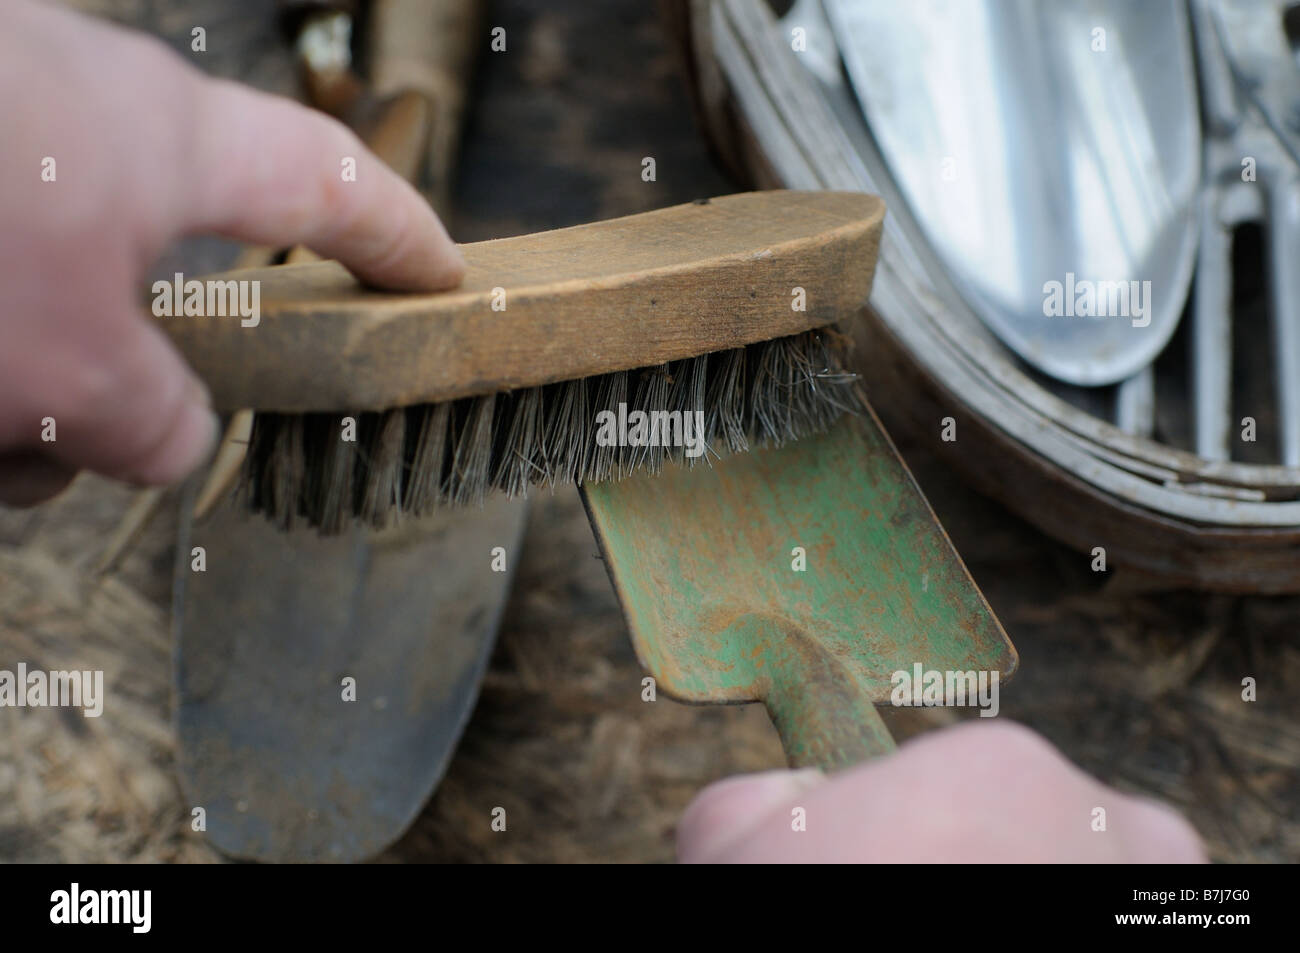 Cleaning gardening hand tools with wire brush Stock Photo